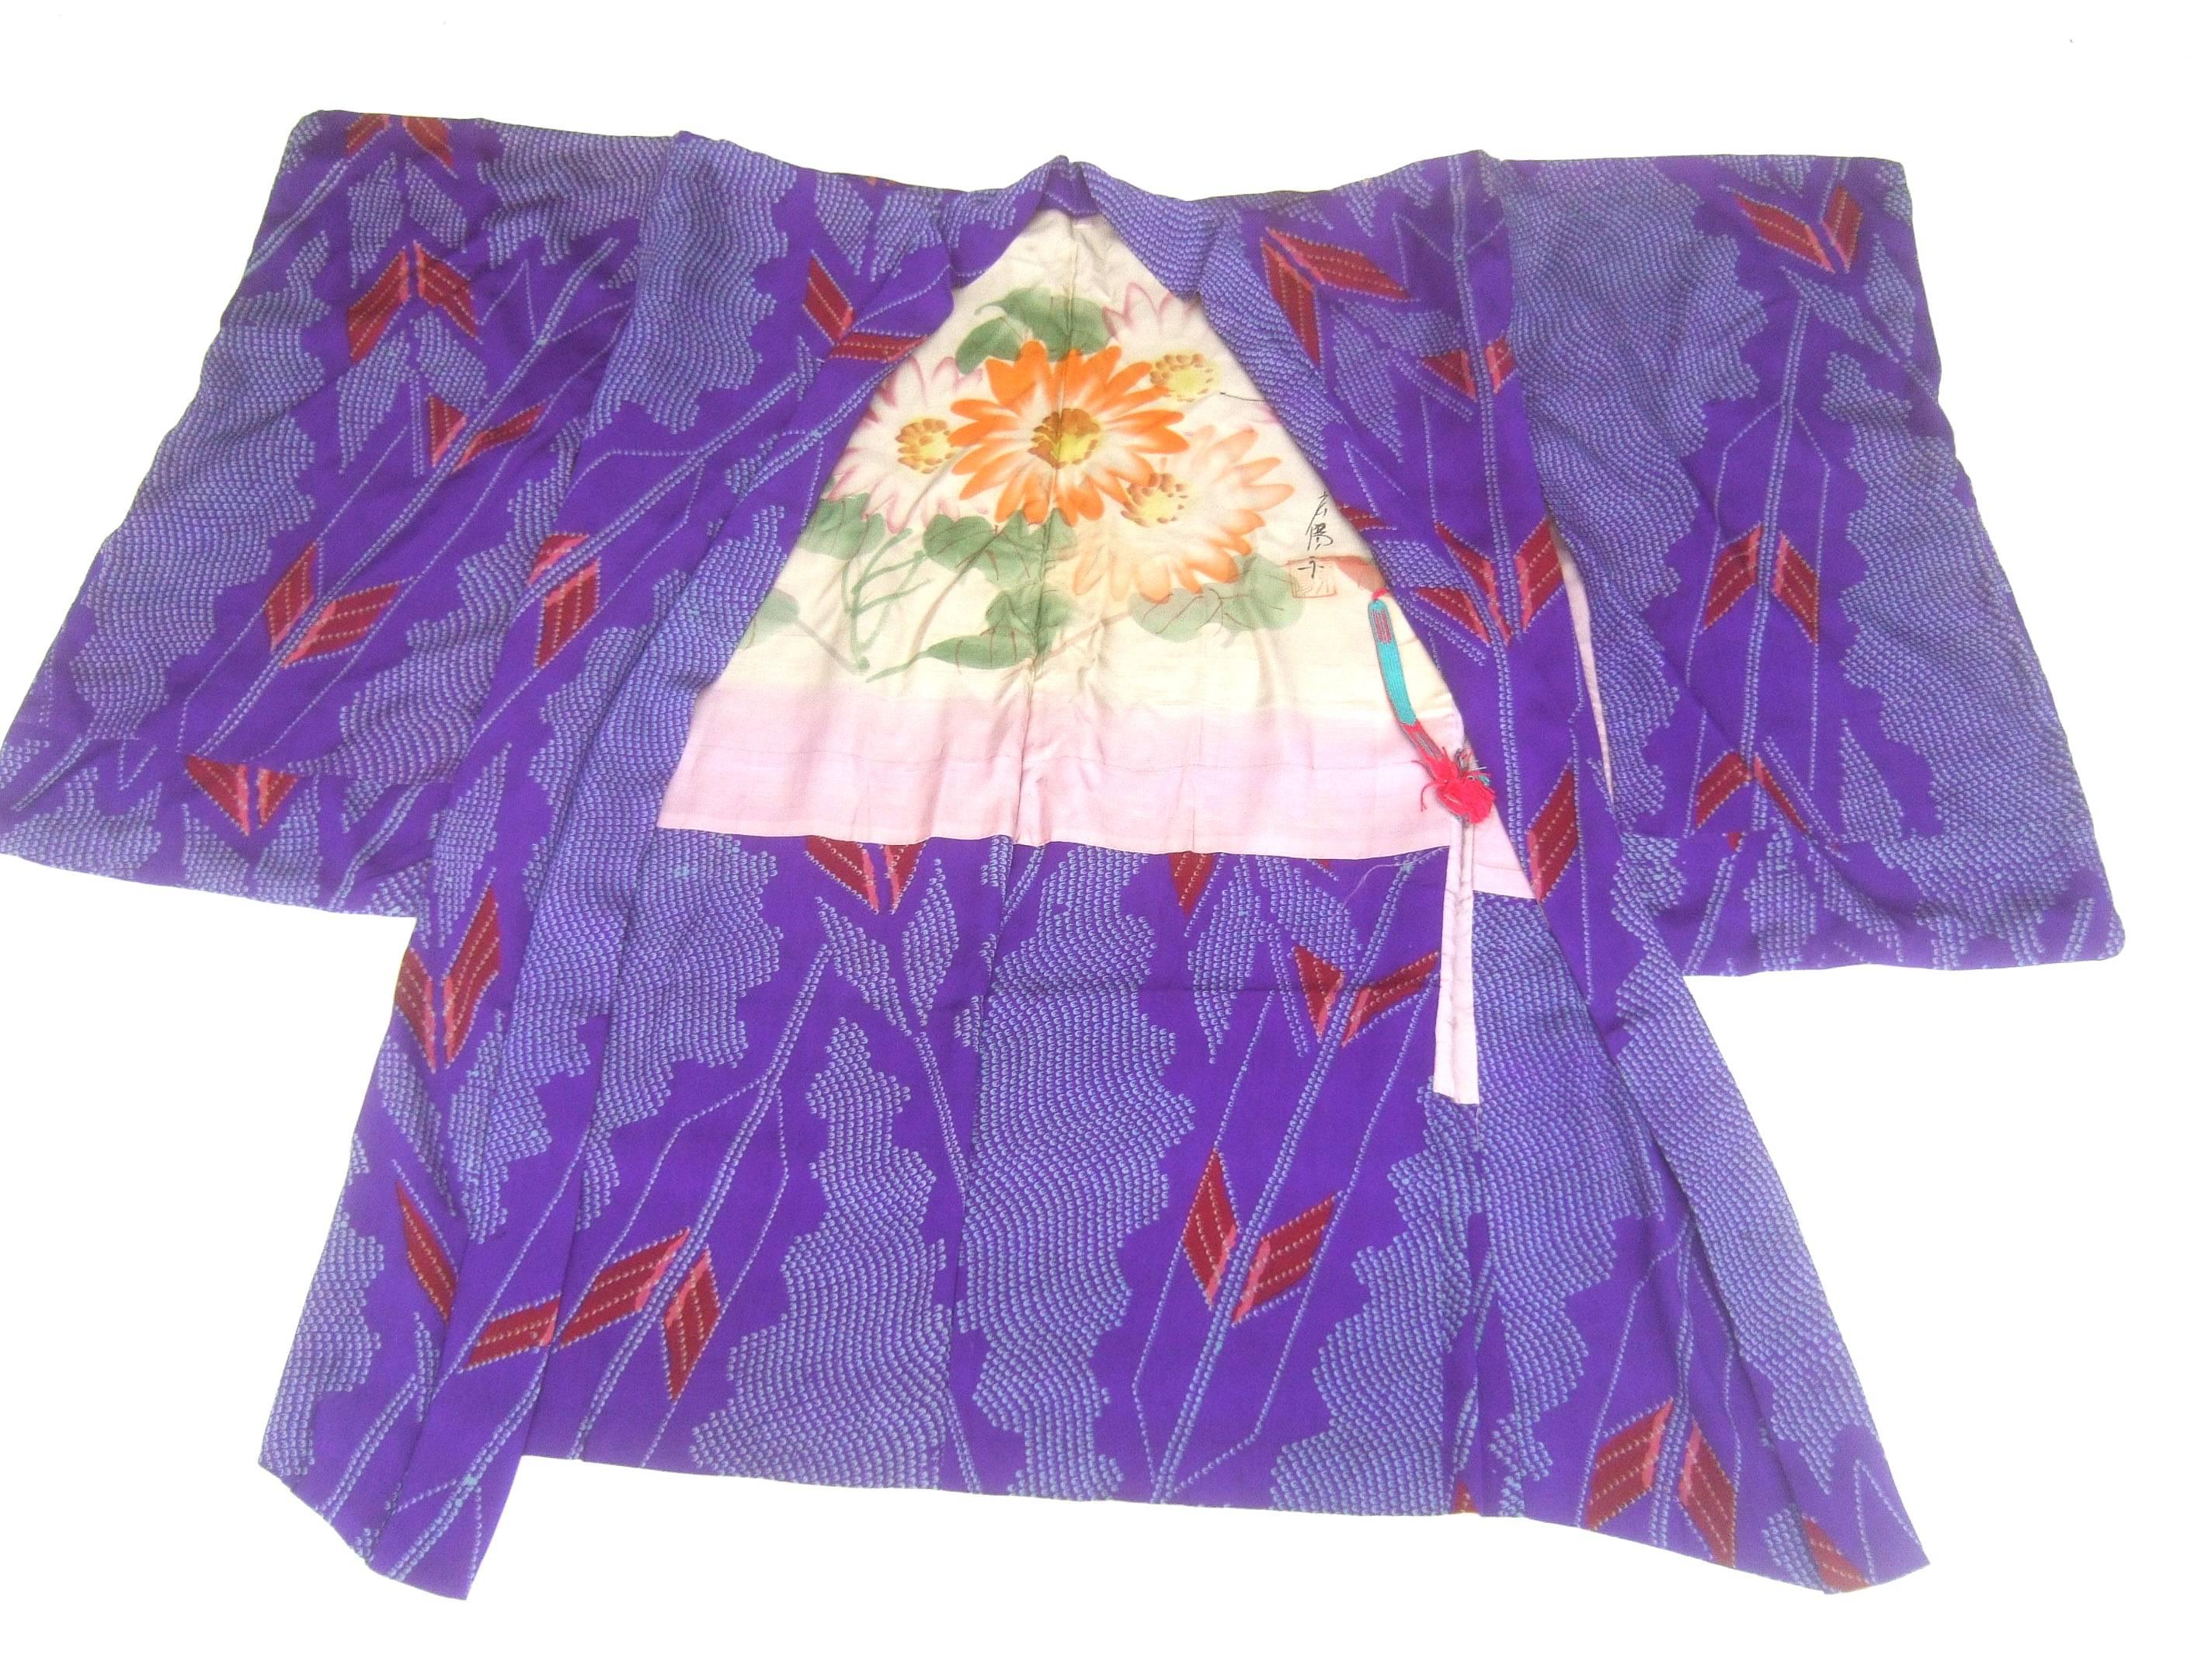 Japanese exotic silk print kimono jacket c 1970s
The vibrant graphic print kimono jacket is infused 
with abstract designs that are illuminated against 
a violet silk background 

The interior is partially lined with a silk panel 
with hand painted